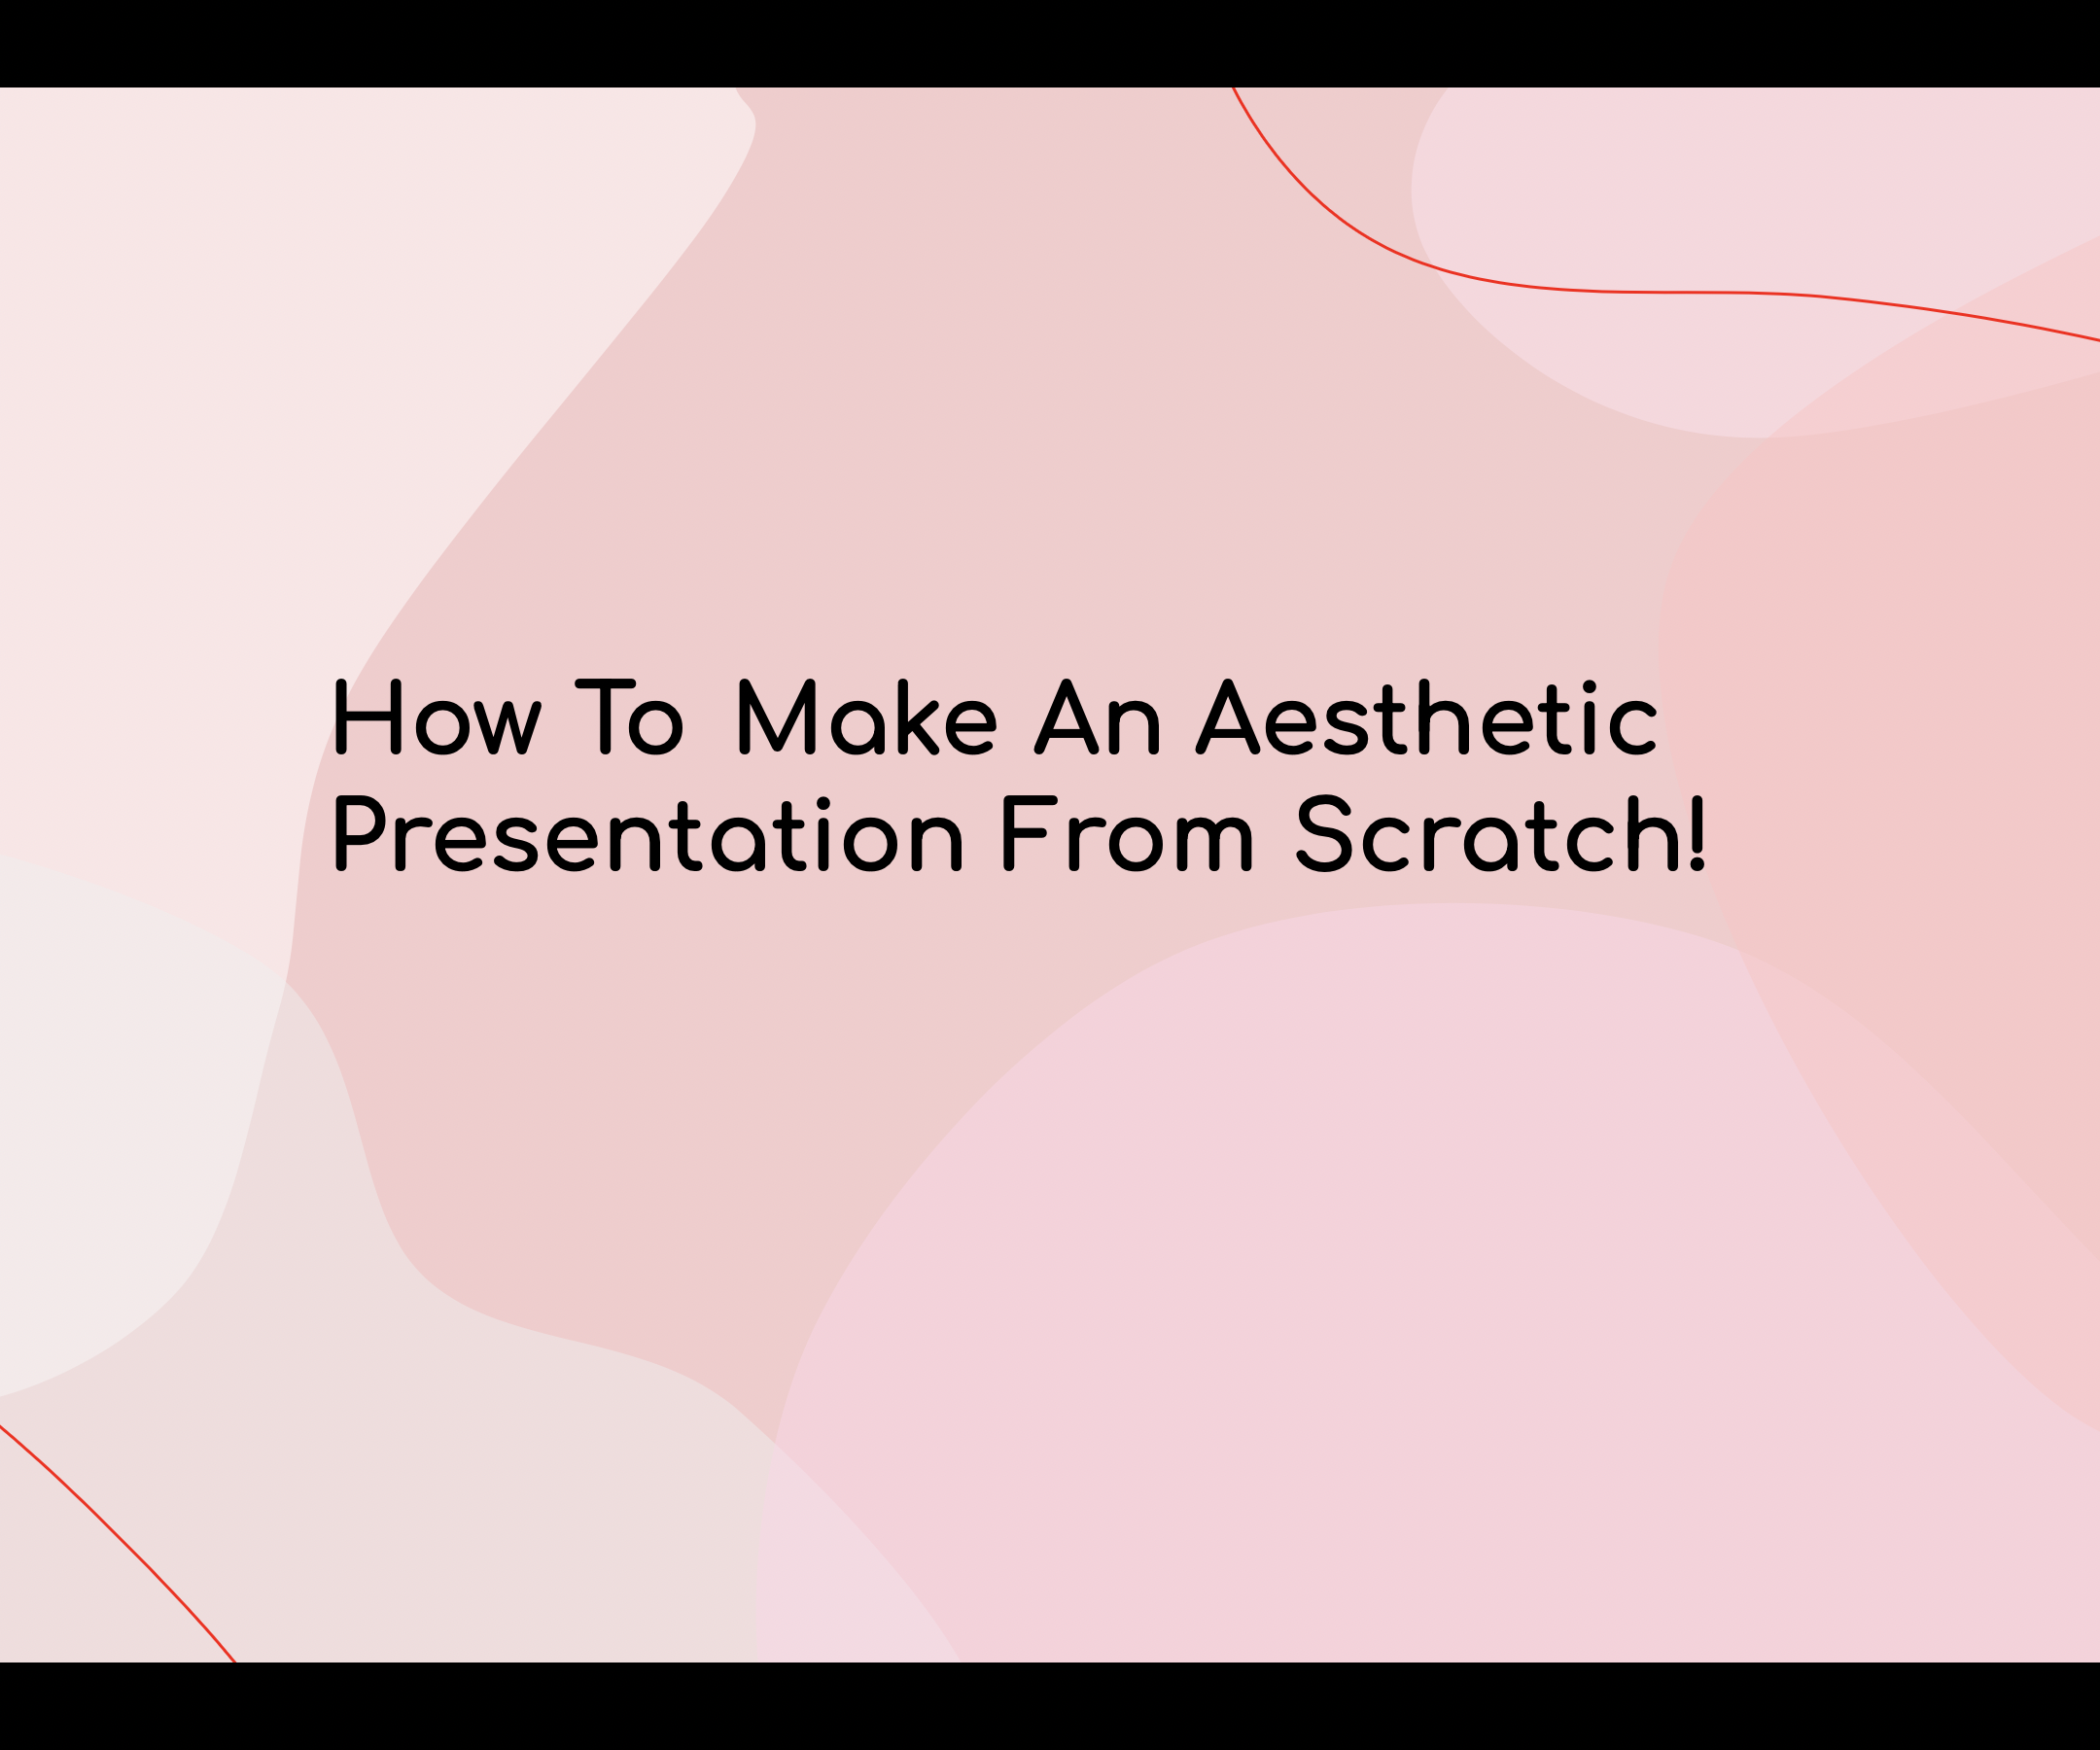 How to Make an Aesthetic Presentation From Scratch!